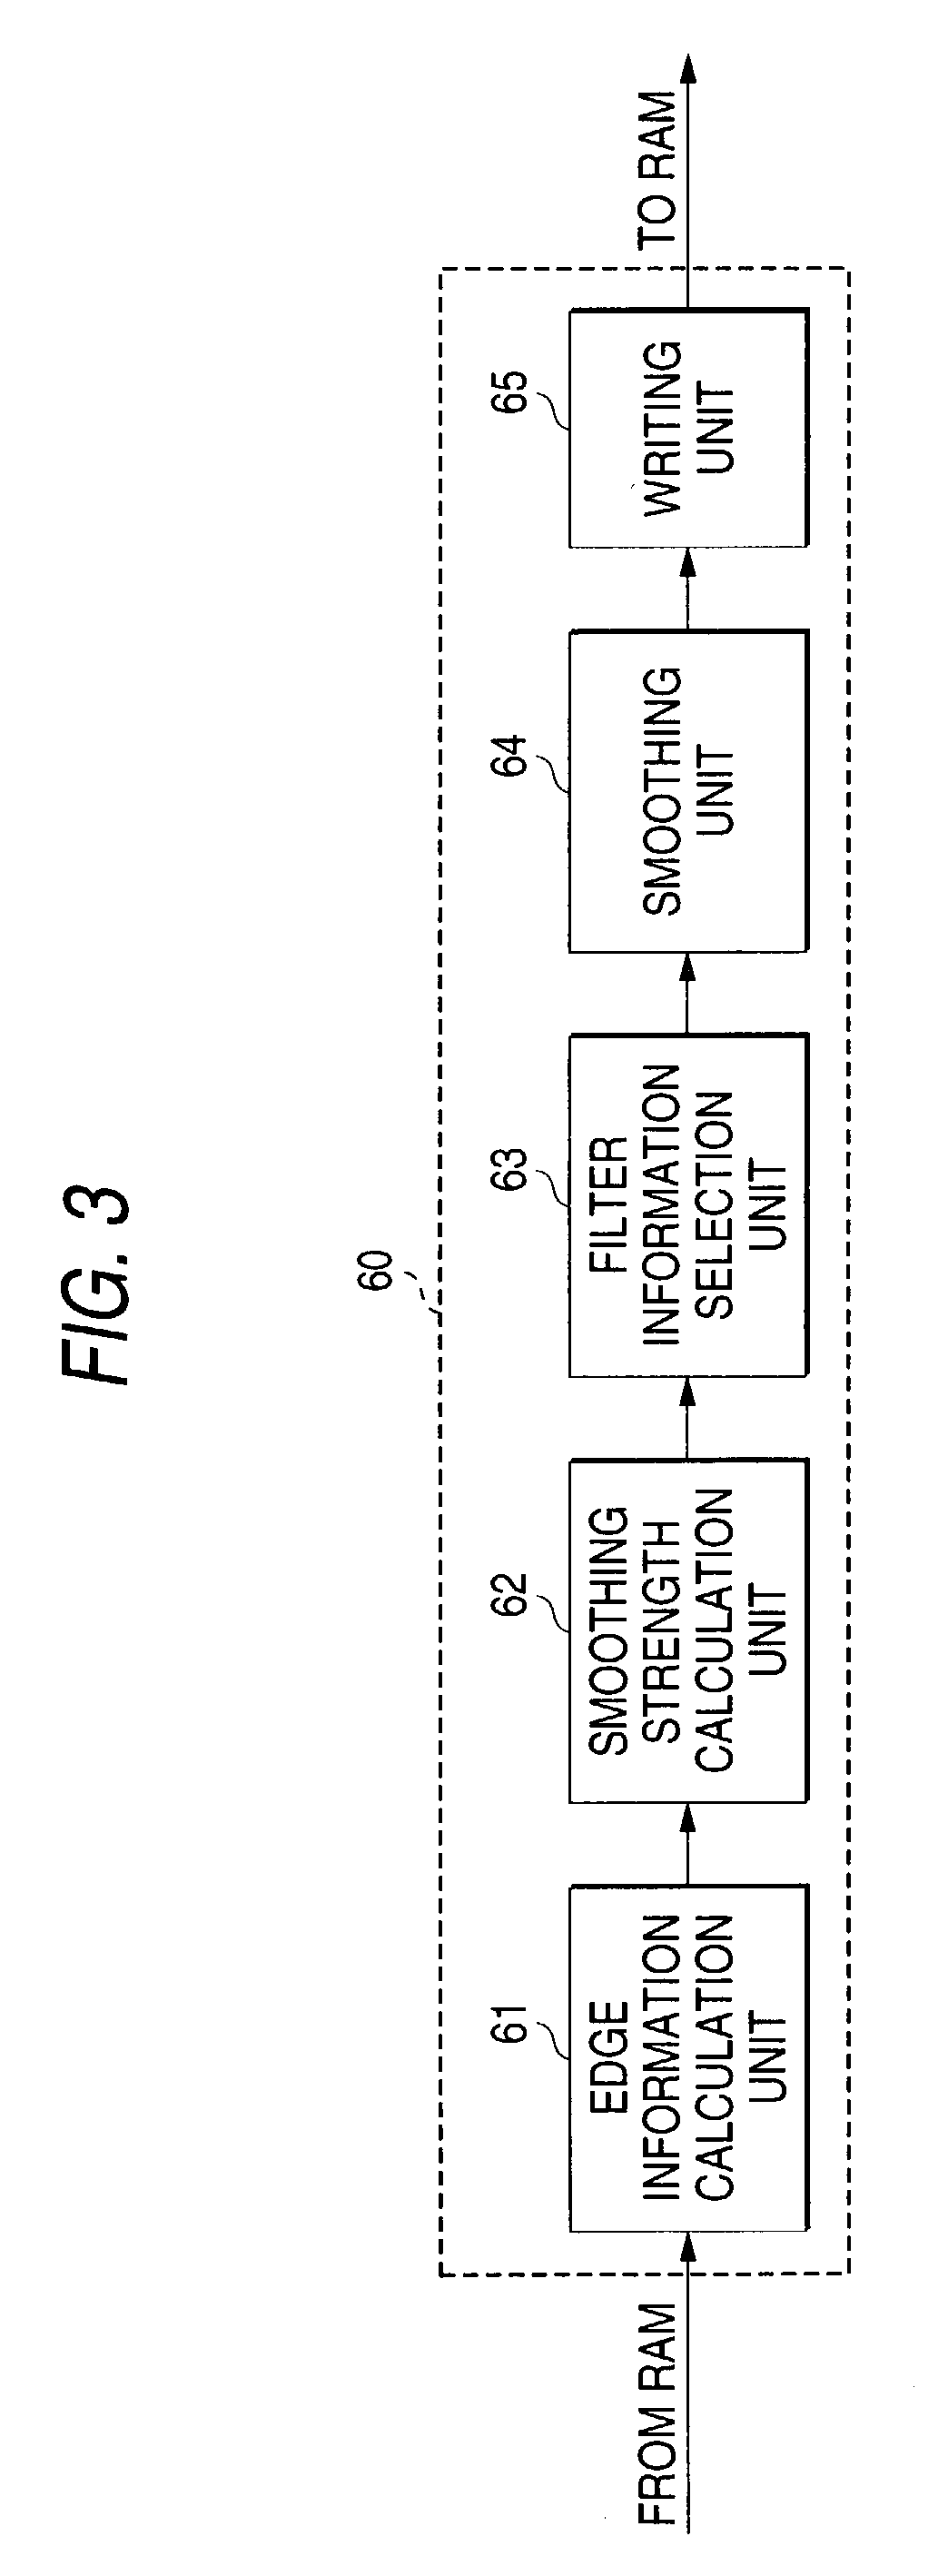 Image processing apparatus and recording medium, and image processing apparatus